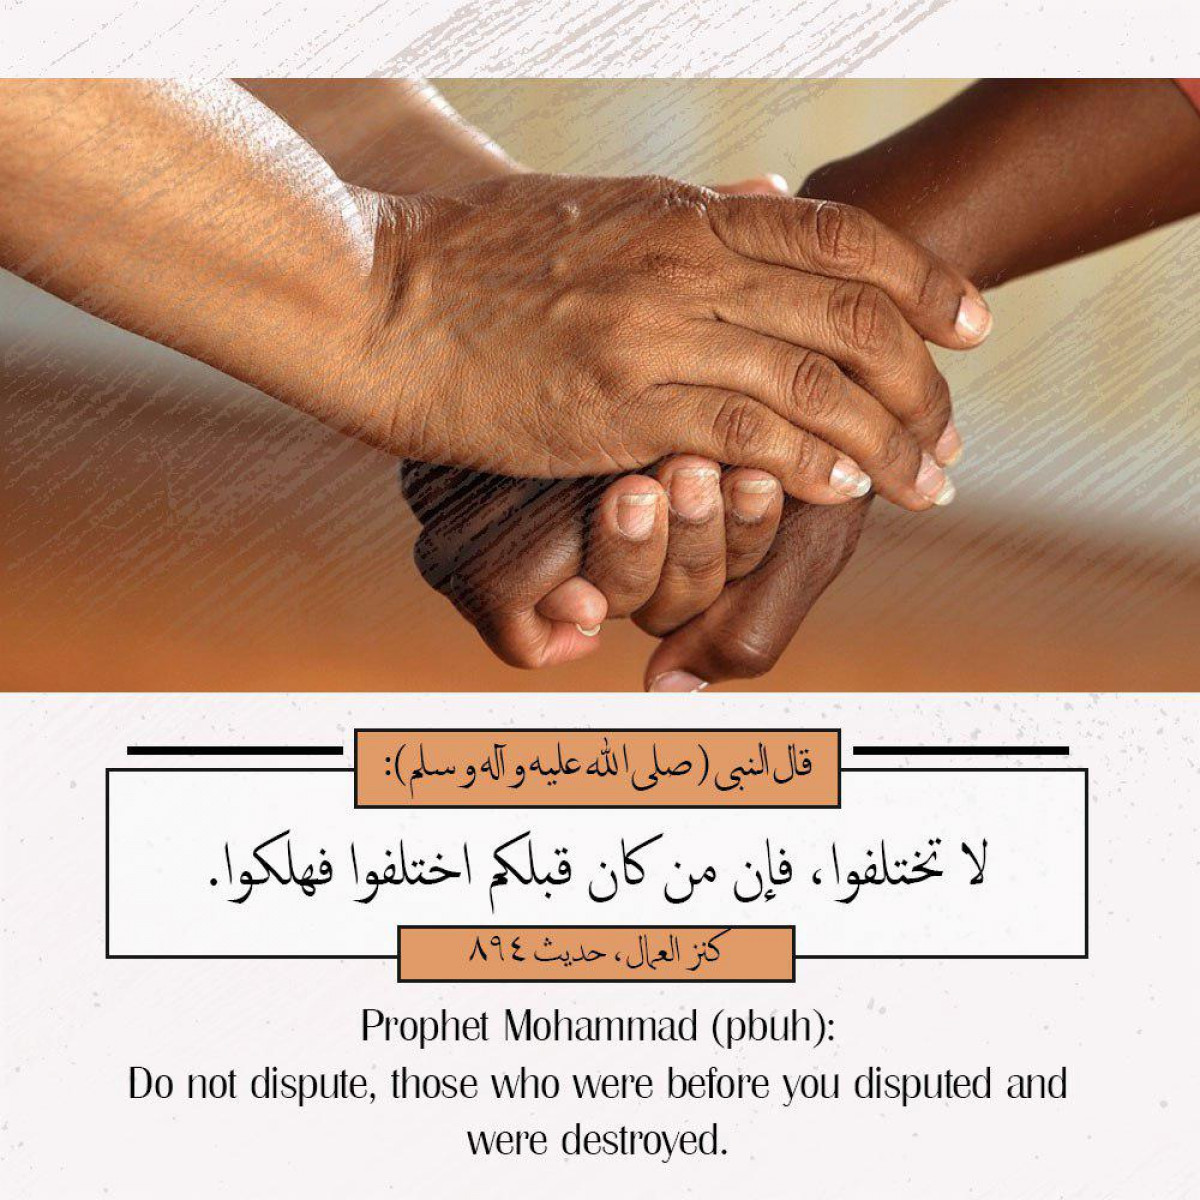 Prophet Mohammad (pbuh): Do not dispute, those who were before you disputed and were destroyed